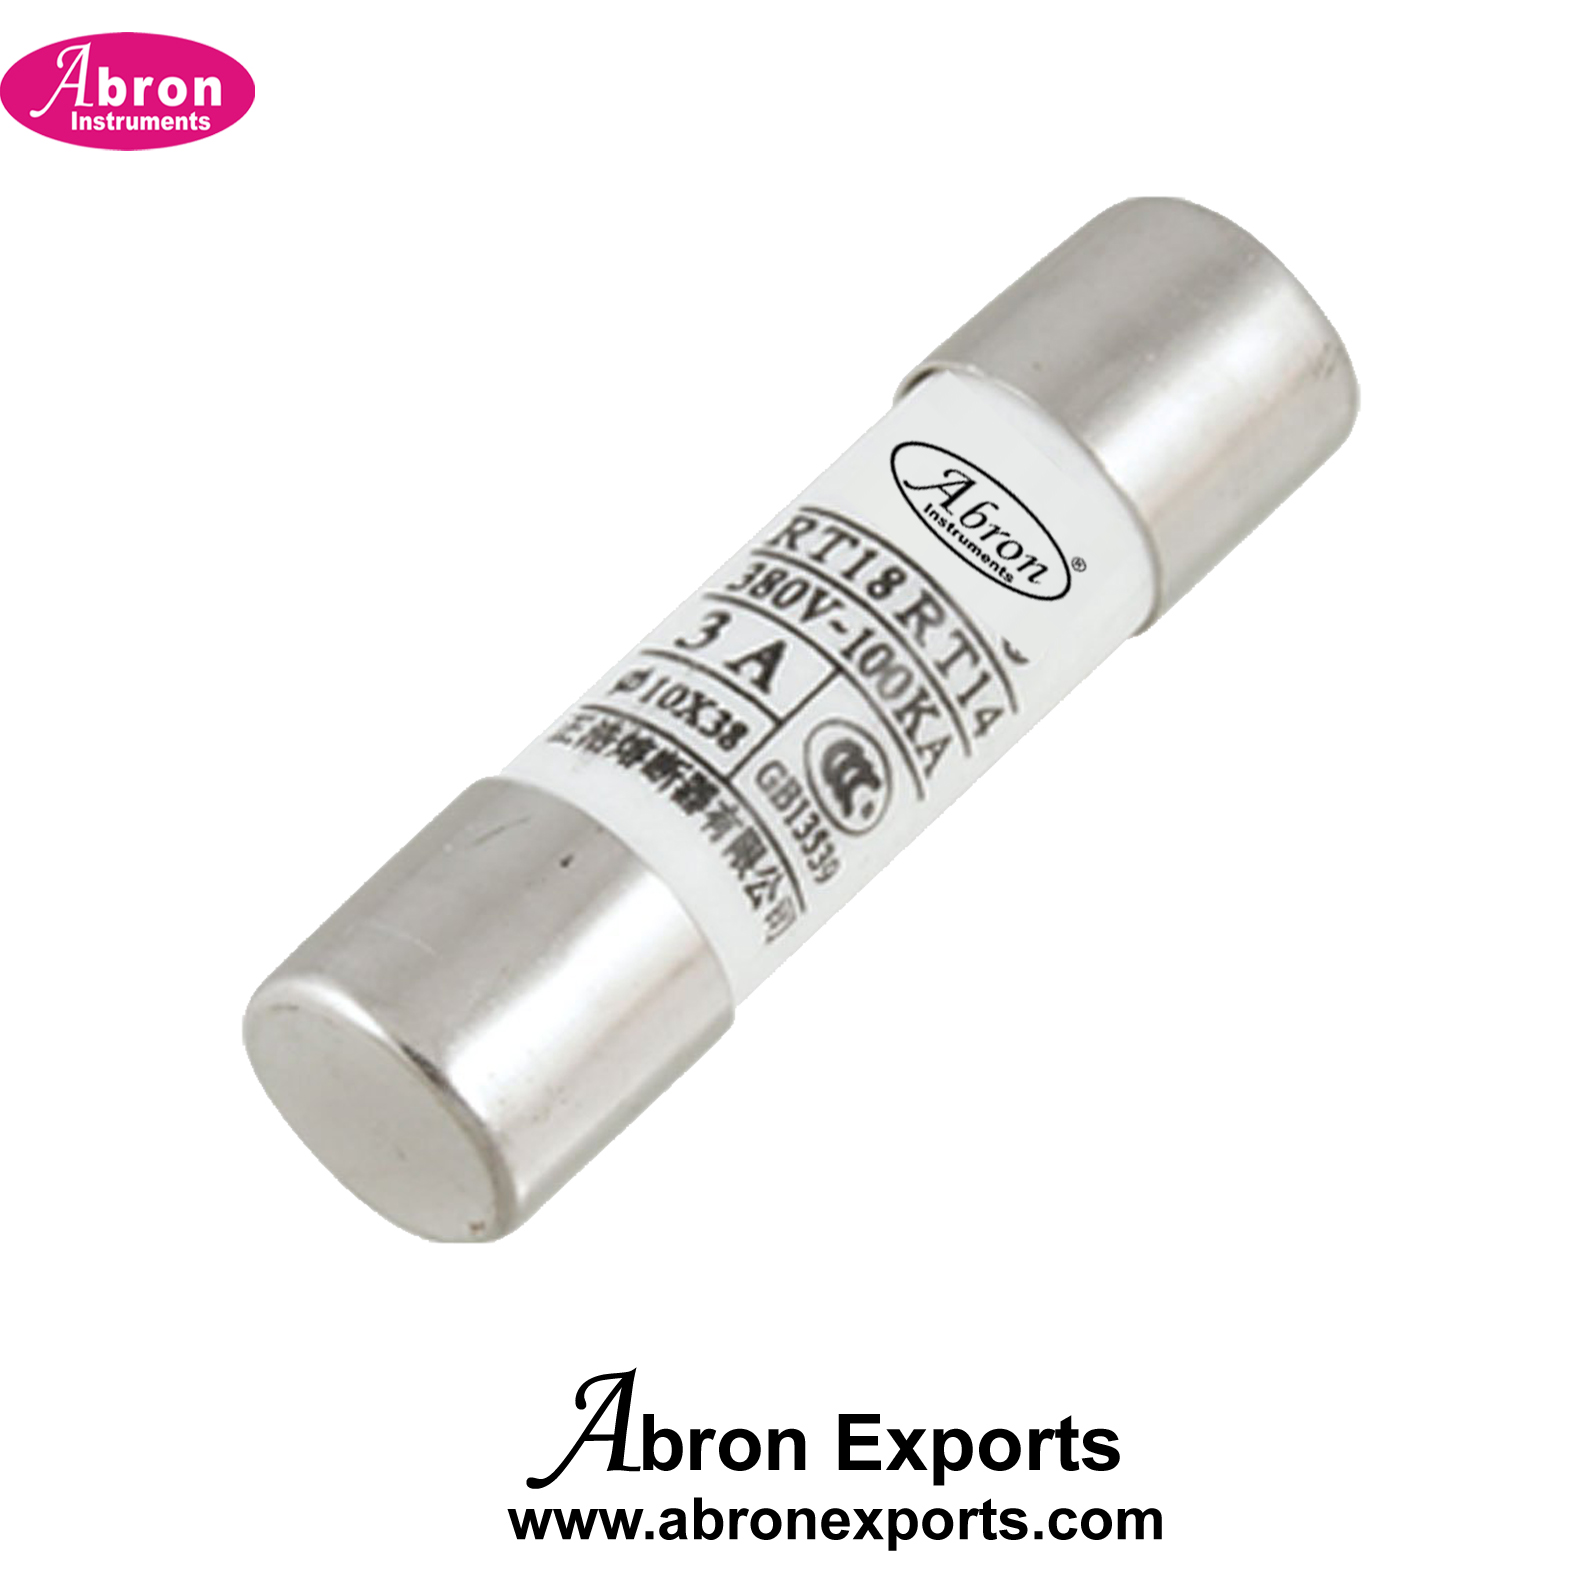 Electronic Component Glass fuse 250v 3amp or 5amp or 10amp etc any one 10mmx 38mm 10pc Abron AE-1224GF38 